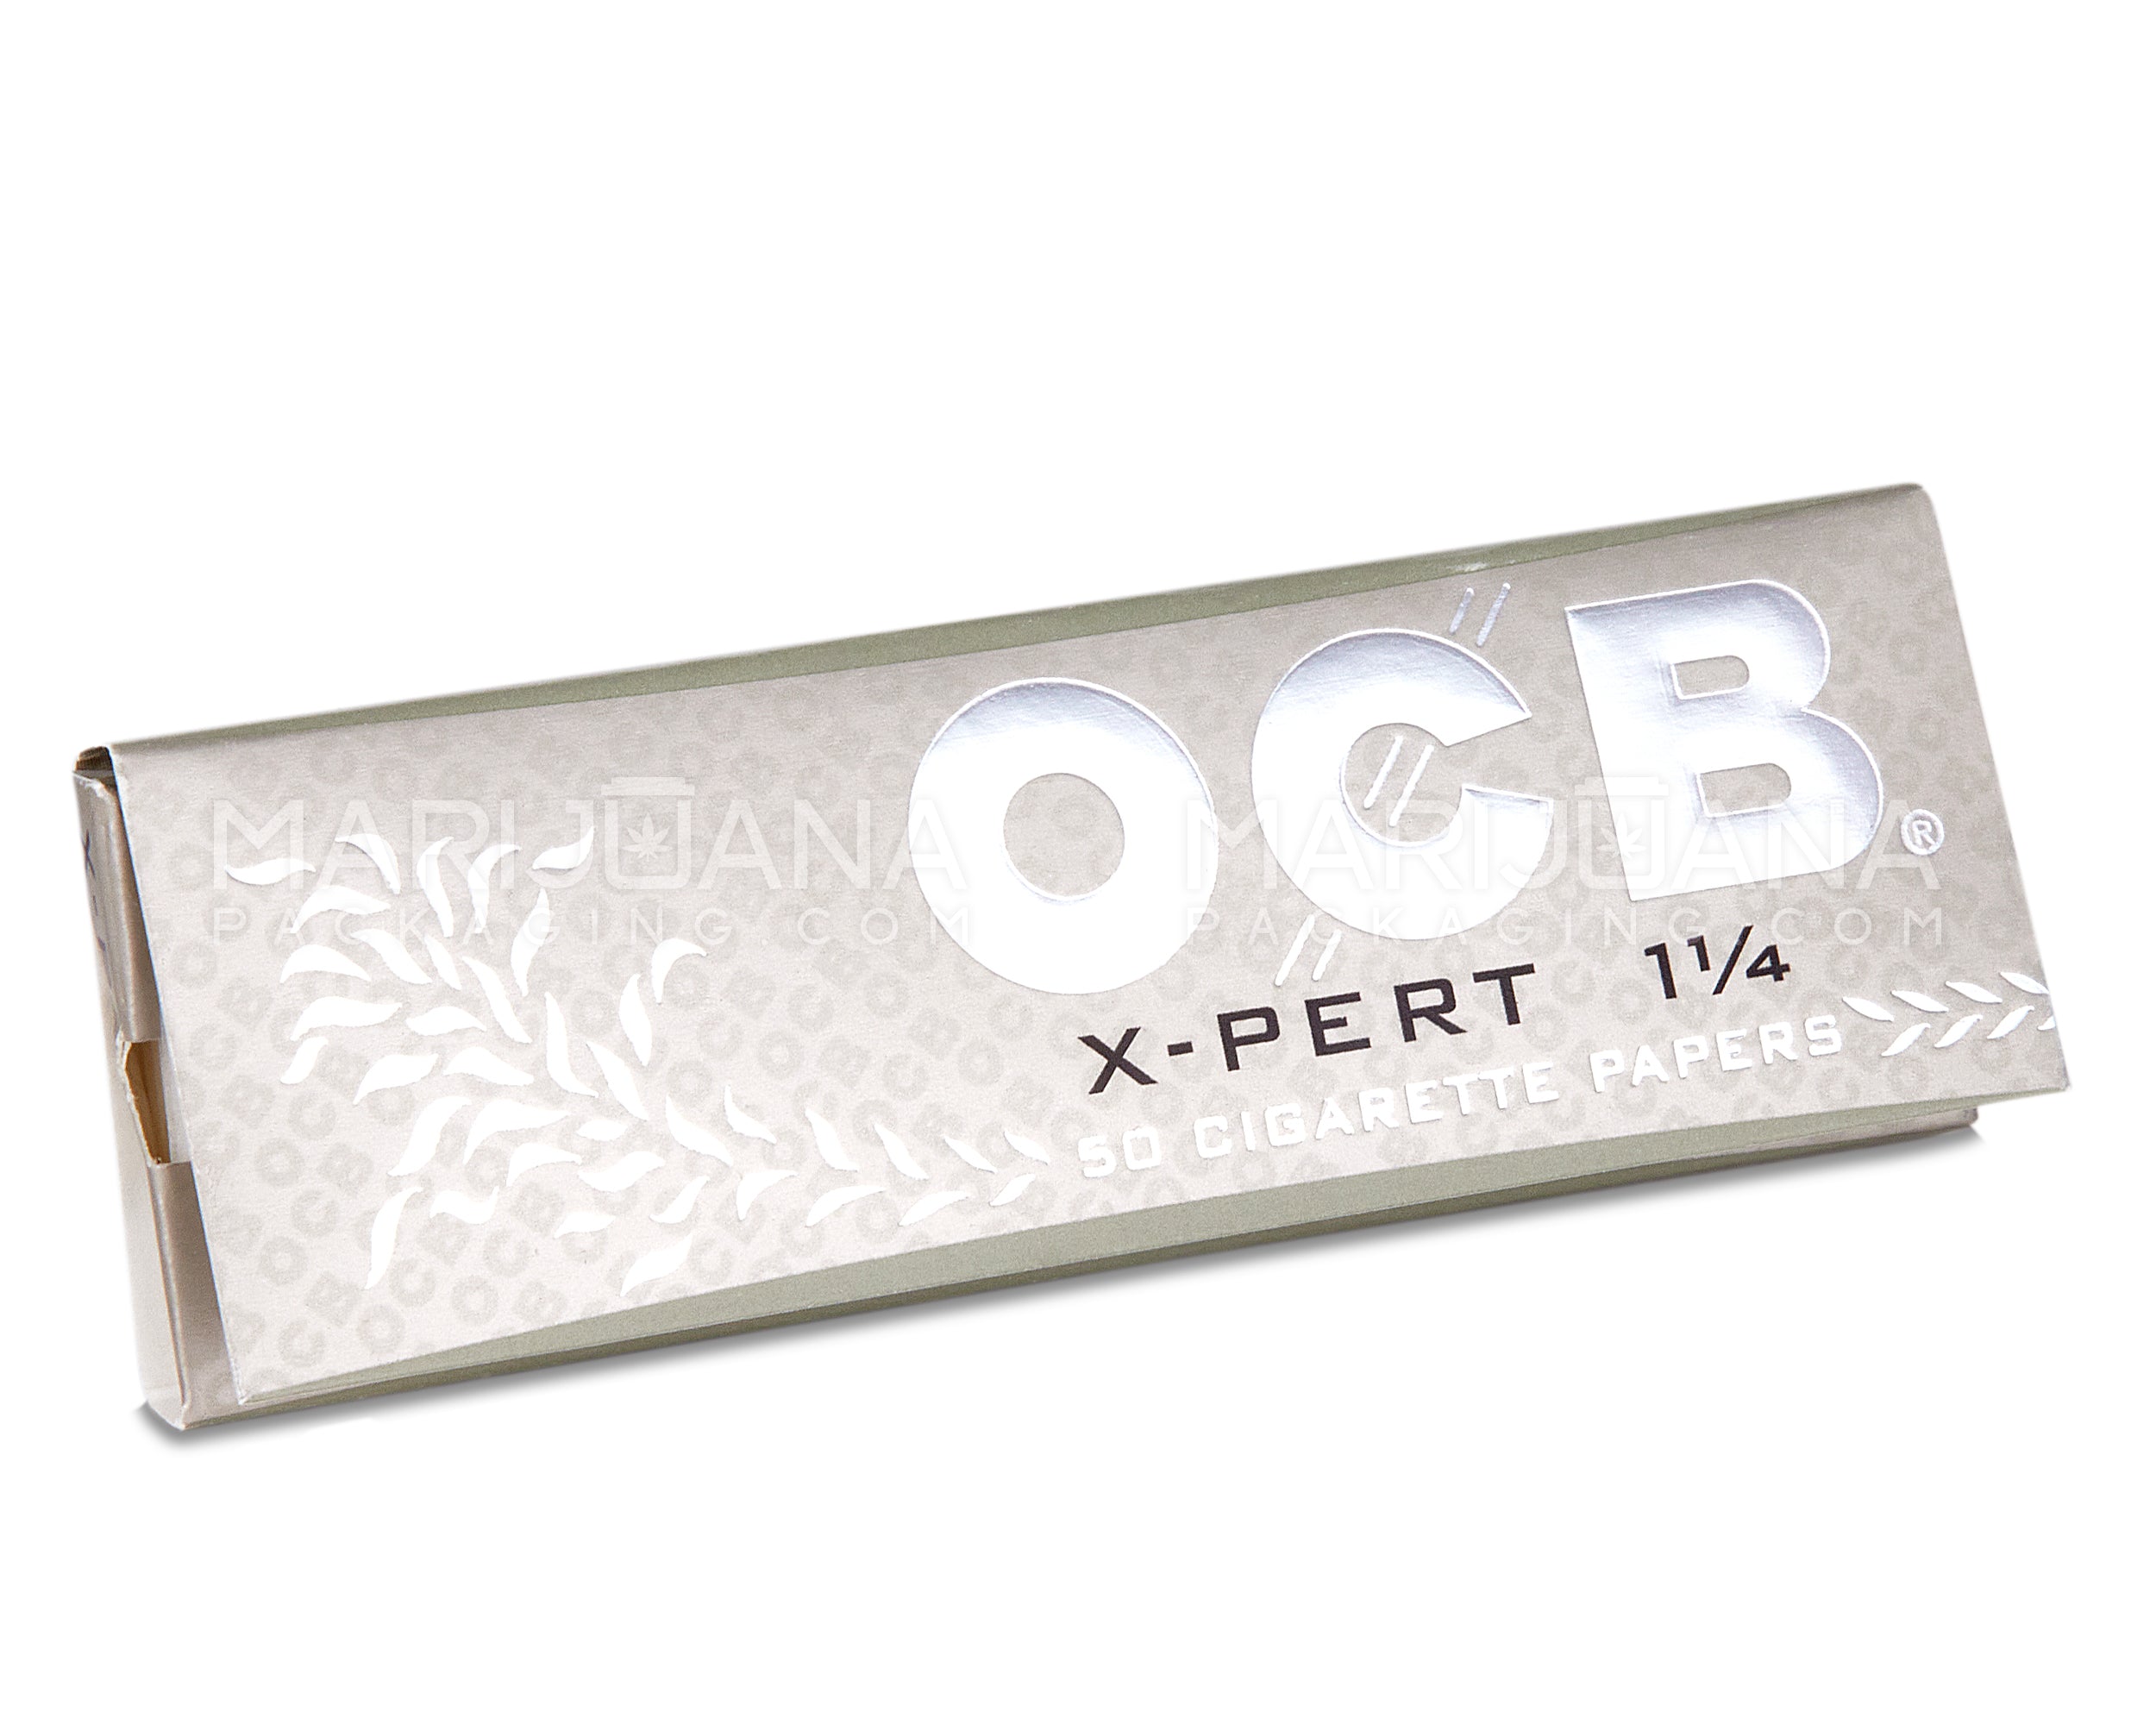 OCB | 'Retail Display' 1 1/4 Size Rolling Papers | 76mm - X Pert - 24 Count - 4